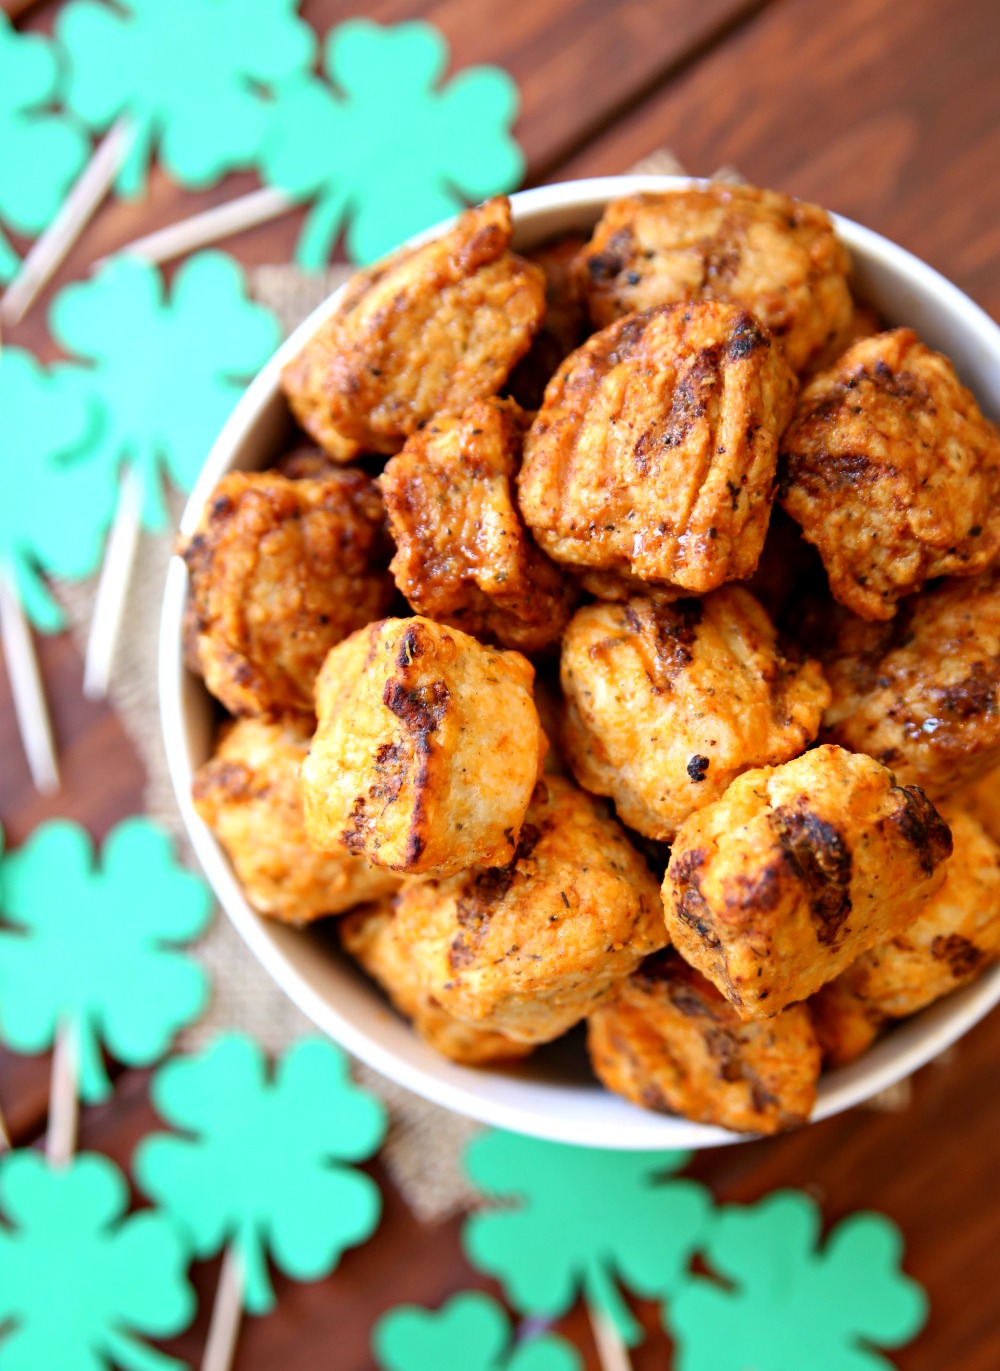 Easy St. Patrick's Day Appetizers